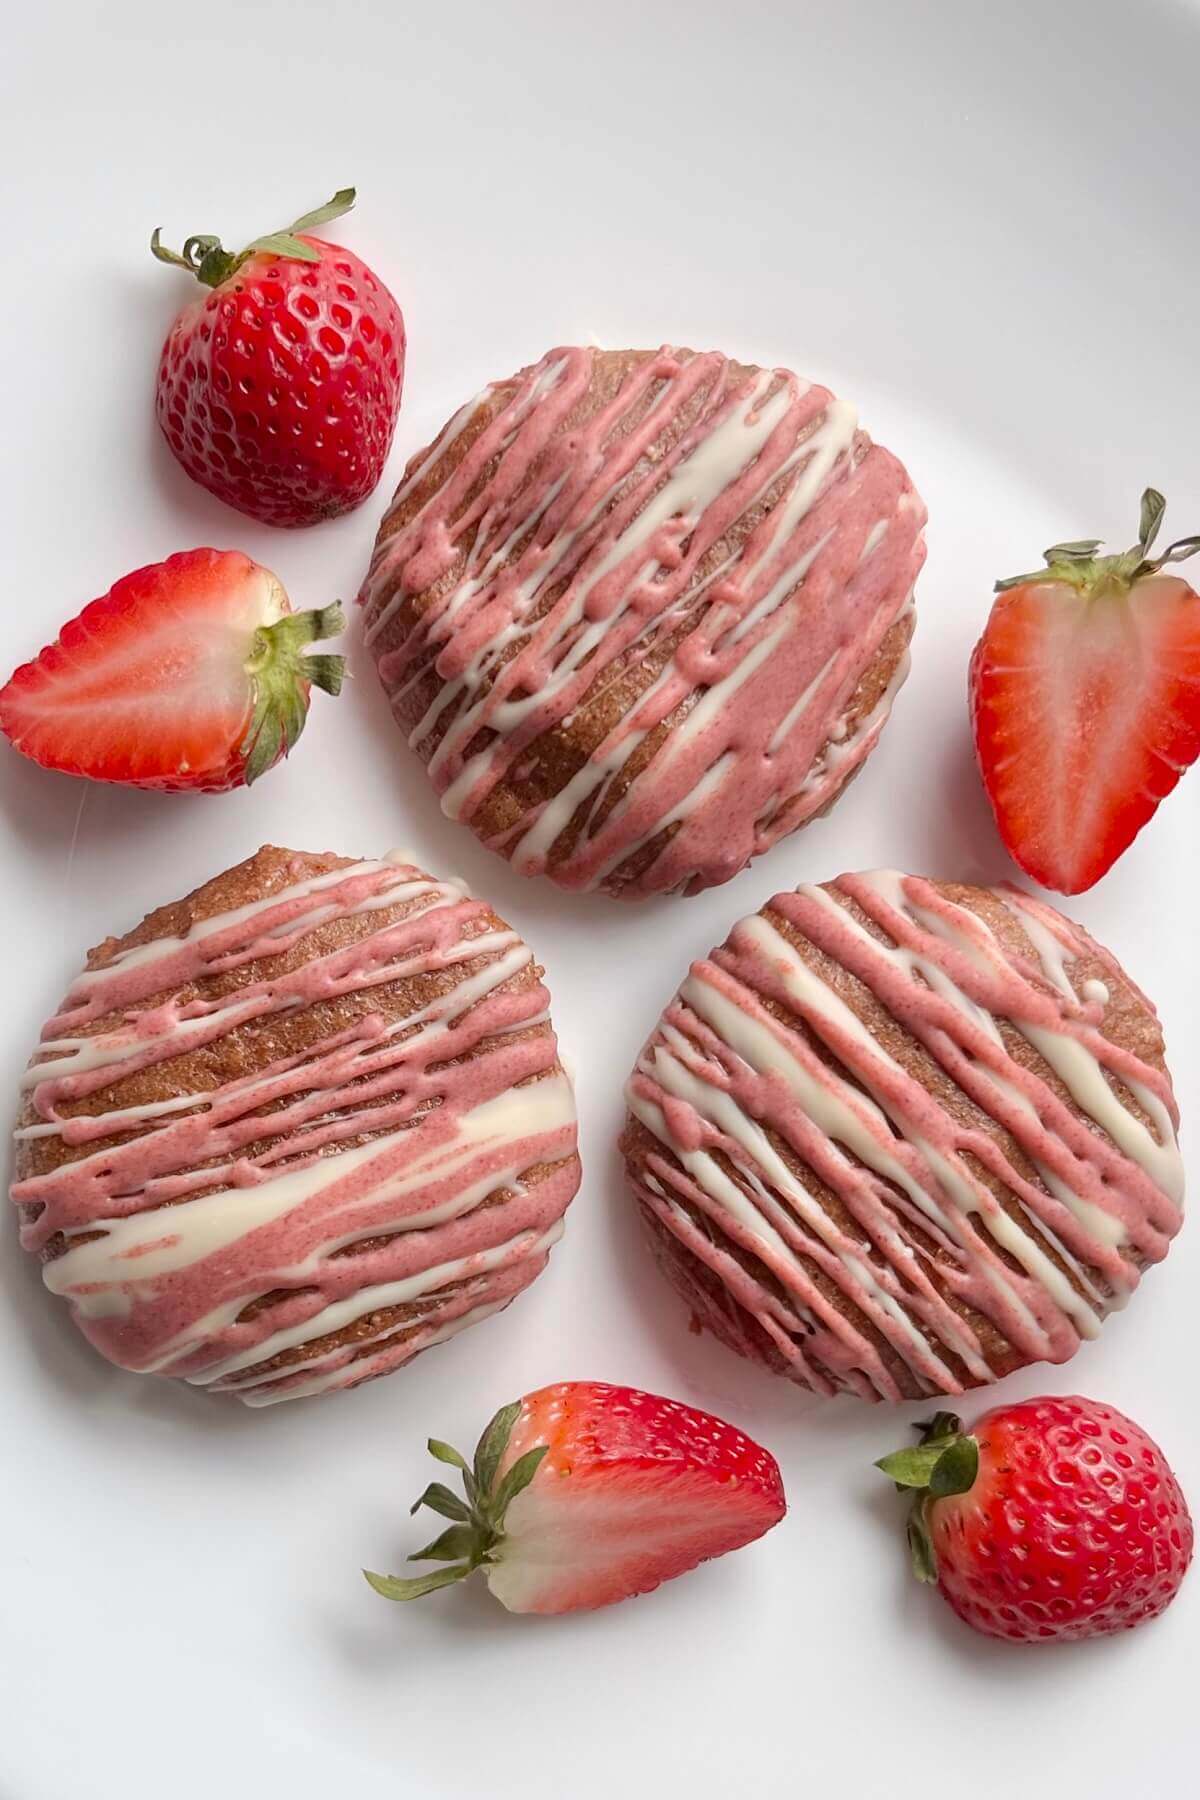 Strawberry cookies surrounded by fresh strawberries.